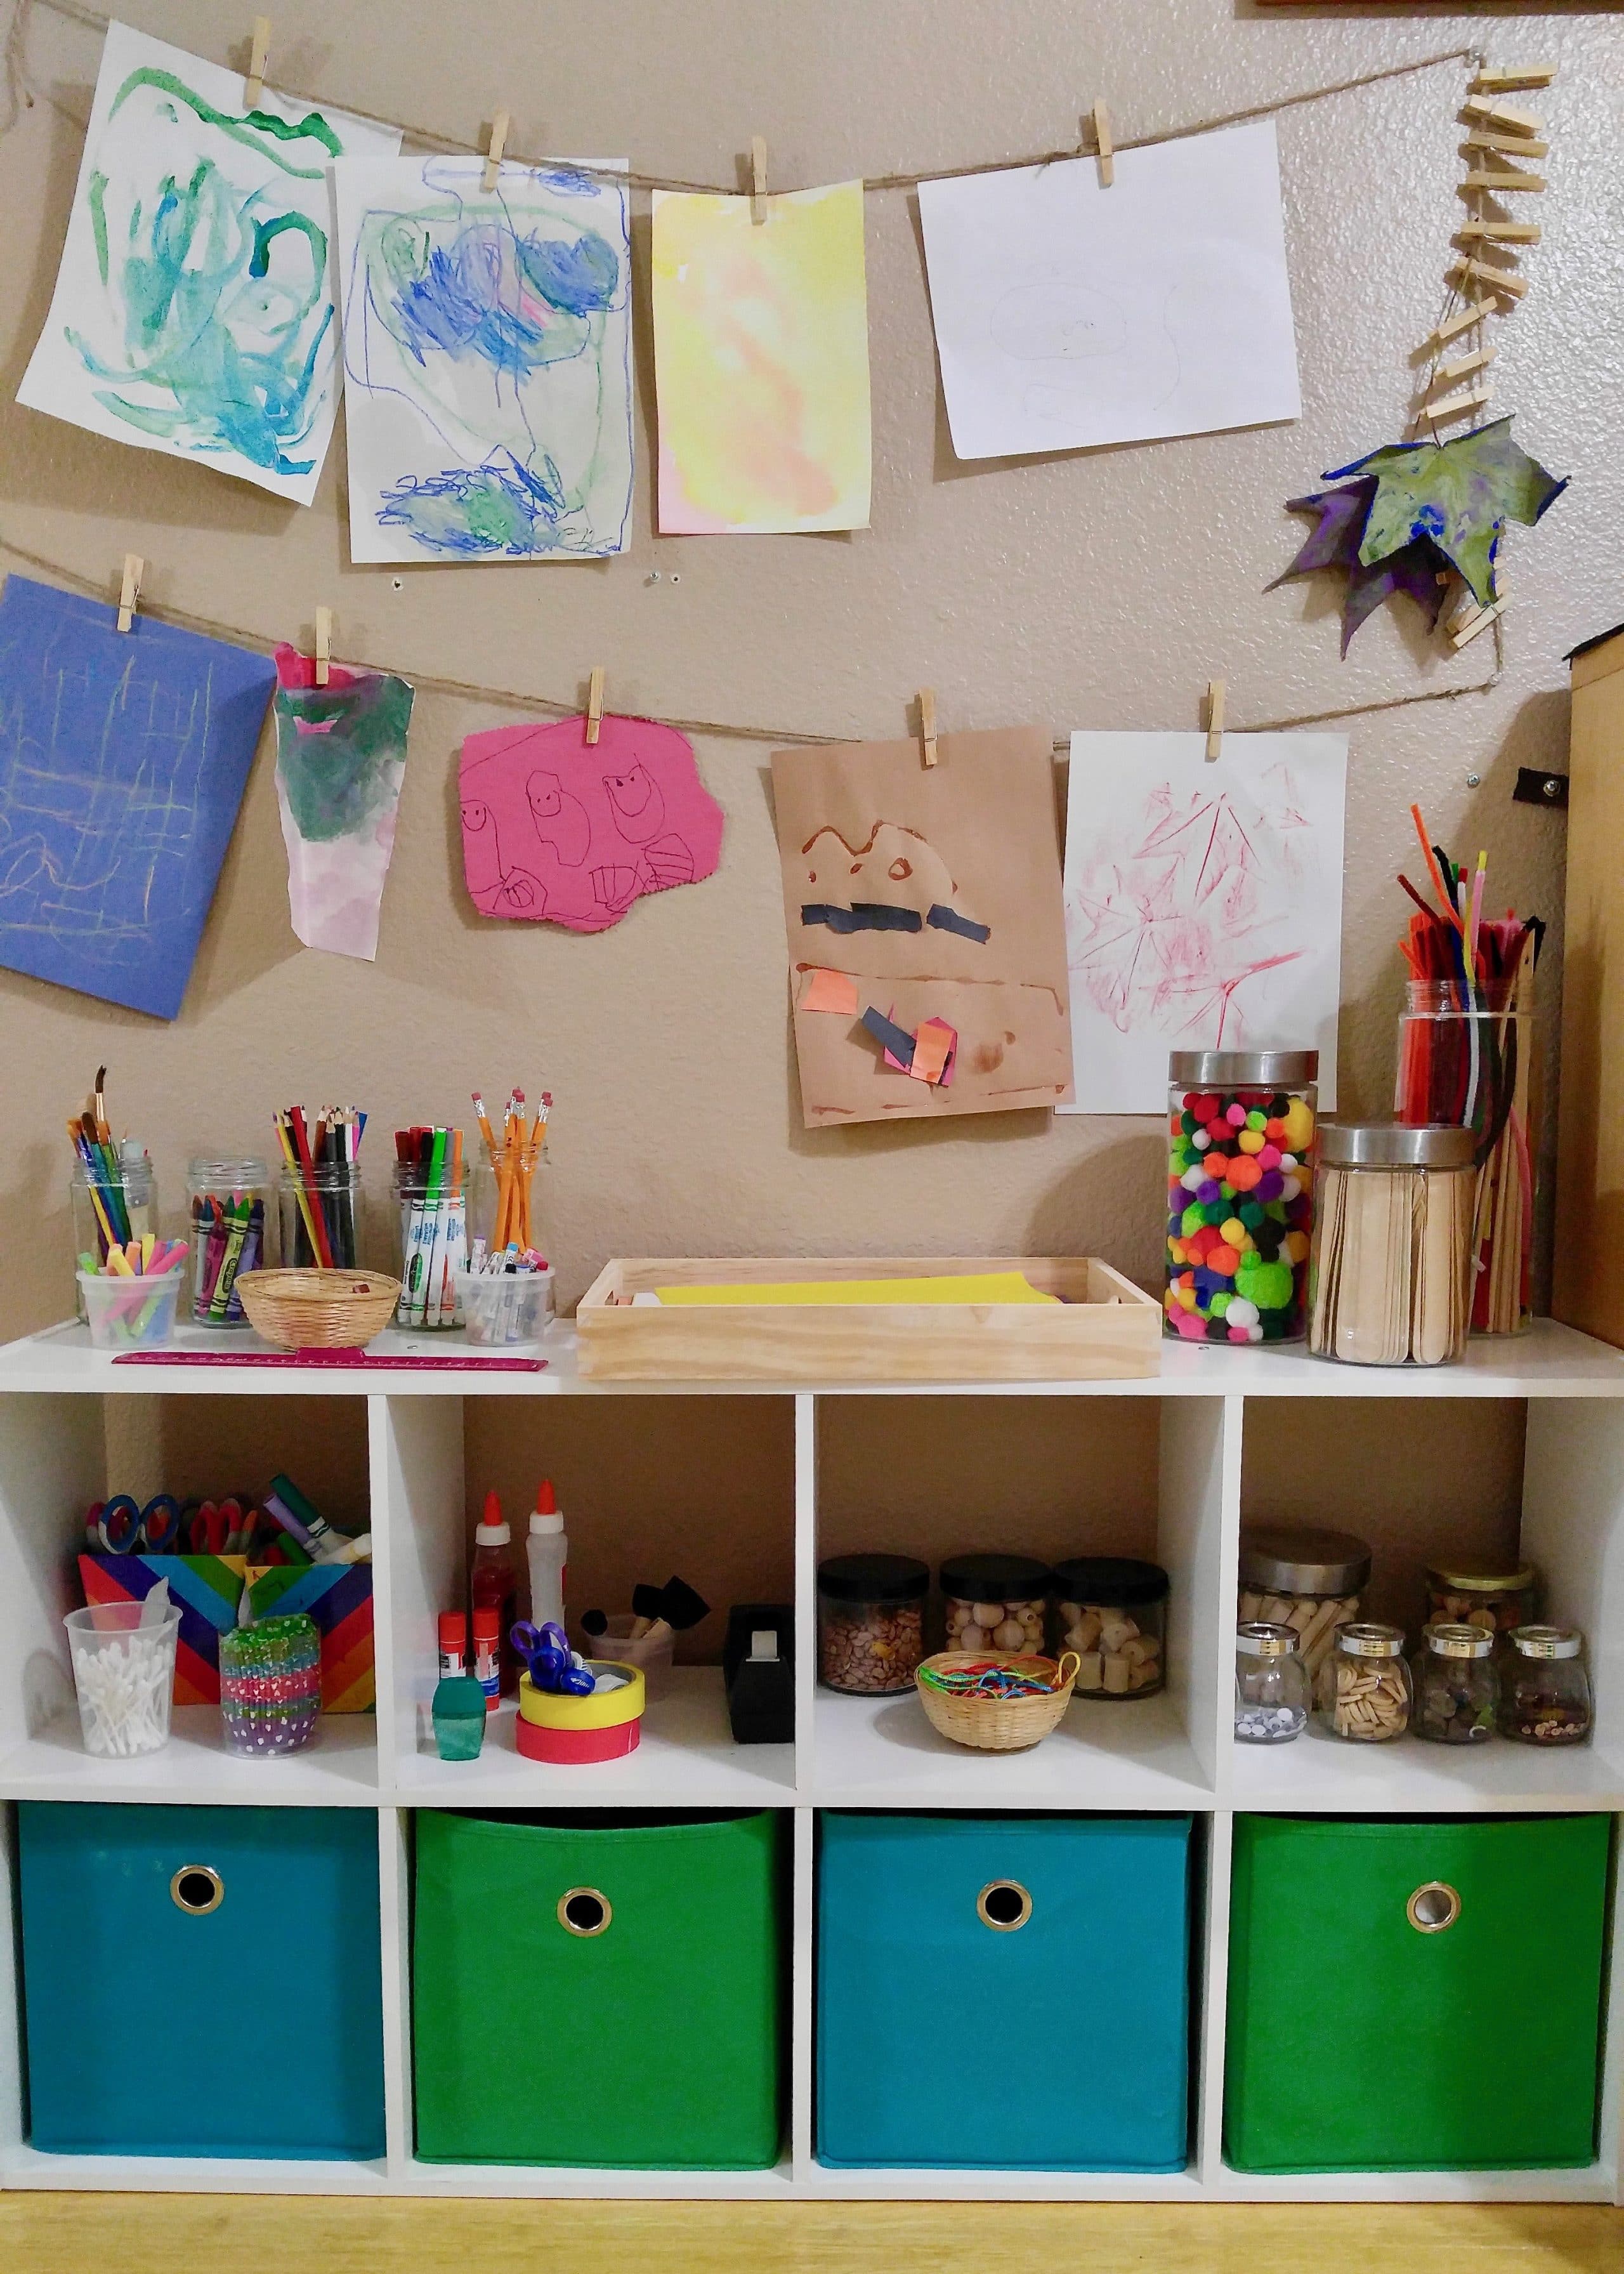 Creating an Art Area for Children (Affordably): What Worked for Us